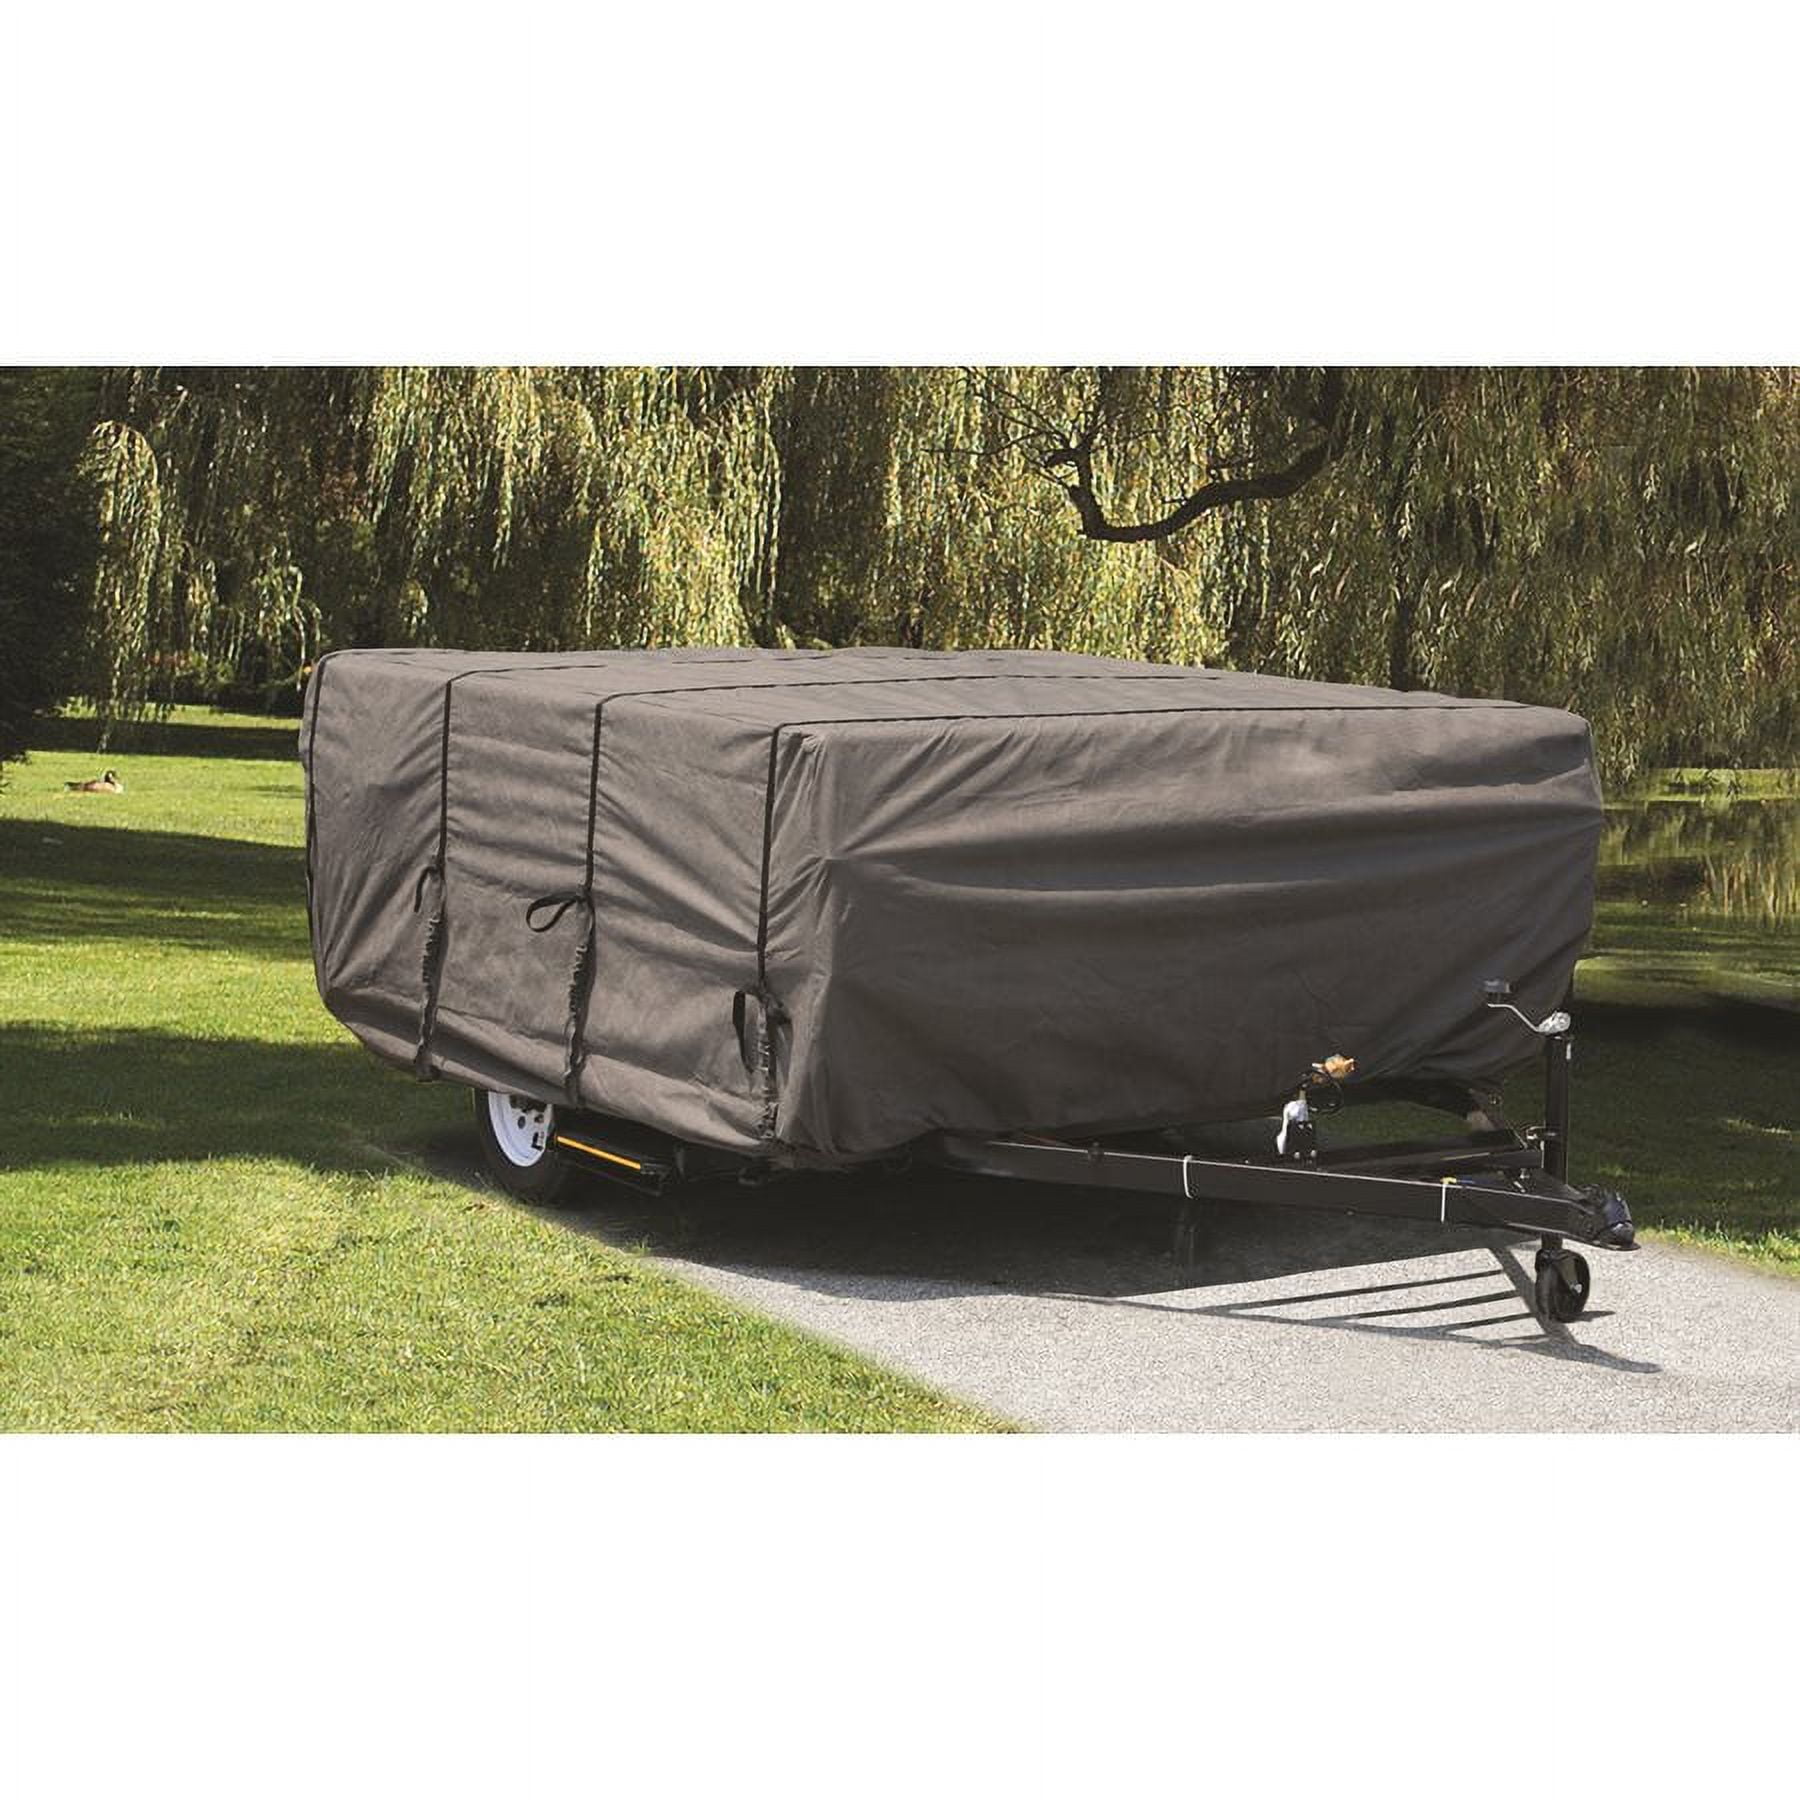 Camco ULTRAGuard Camper/RV Cover Fits Pop-Up Campers to 10-Feet  Extremely Durable Design that Protects Against the Elements (45761) 